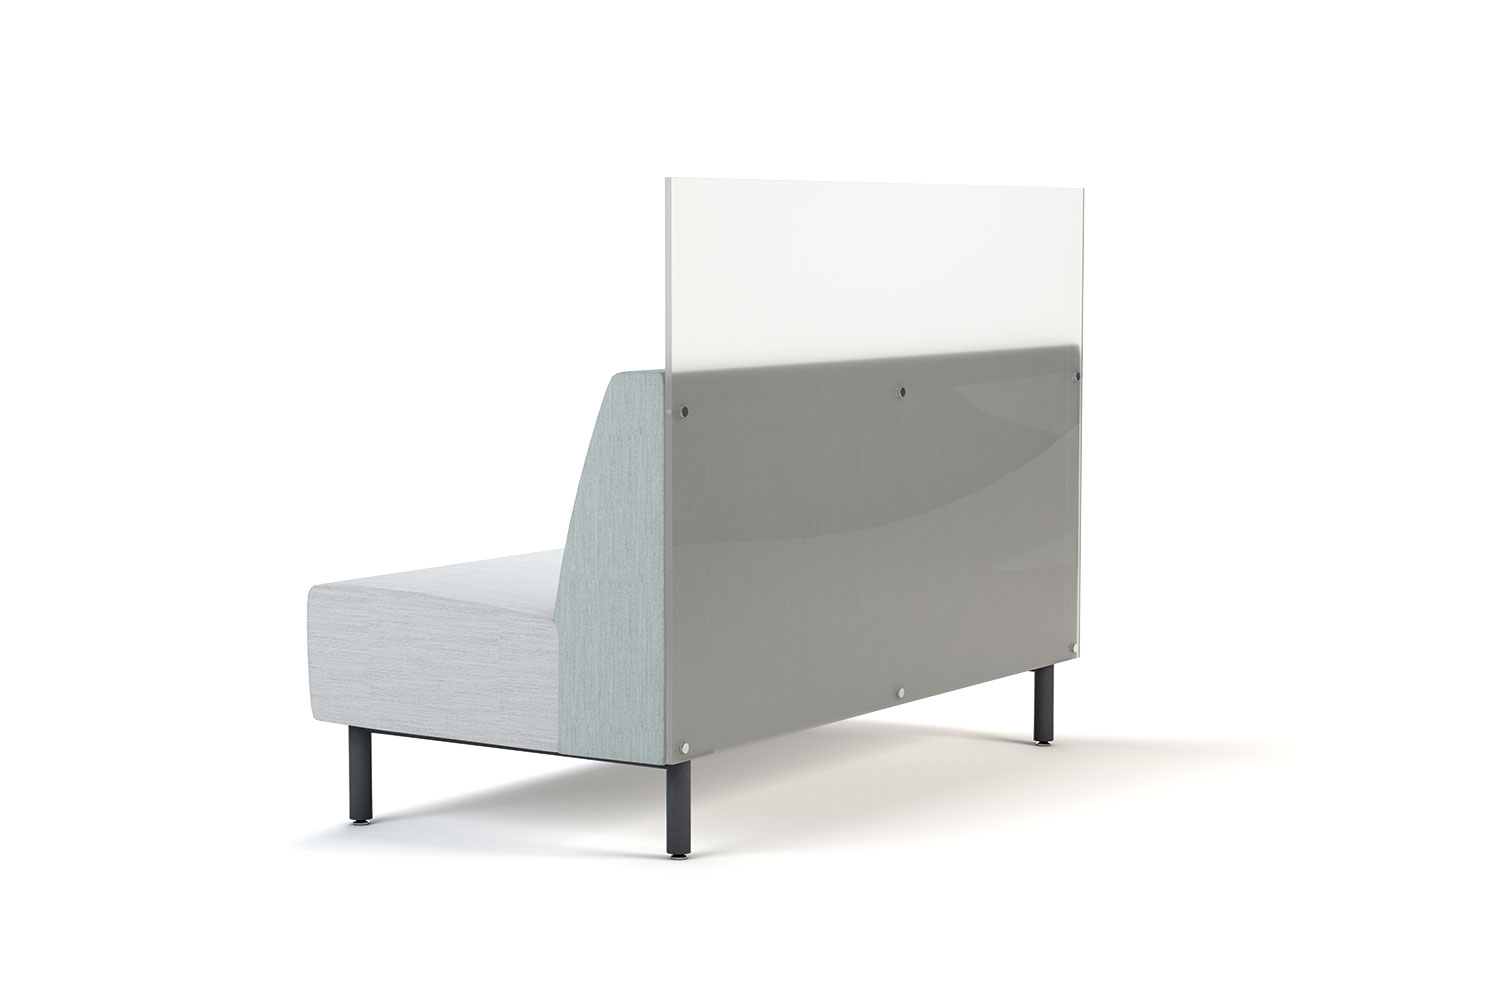 Tivoli 48 inch Straight Banquette with Acrylic Panel